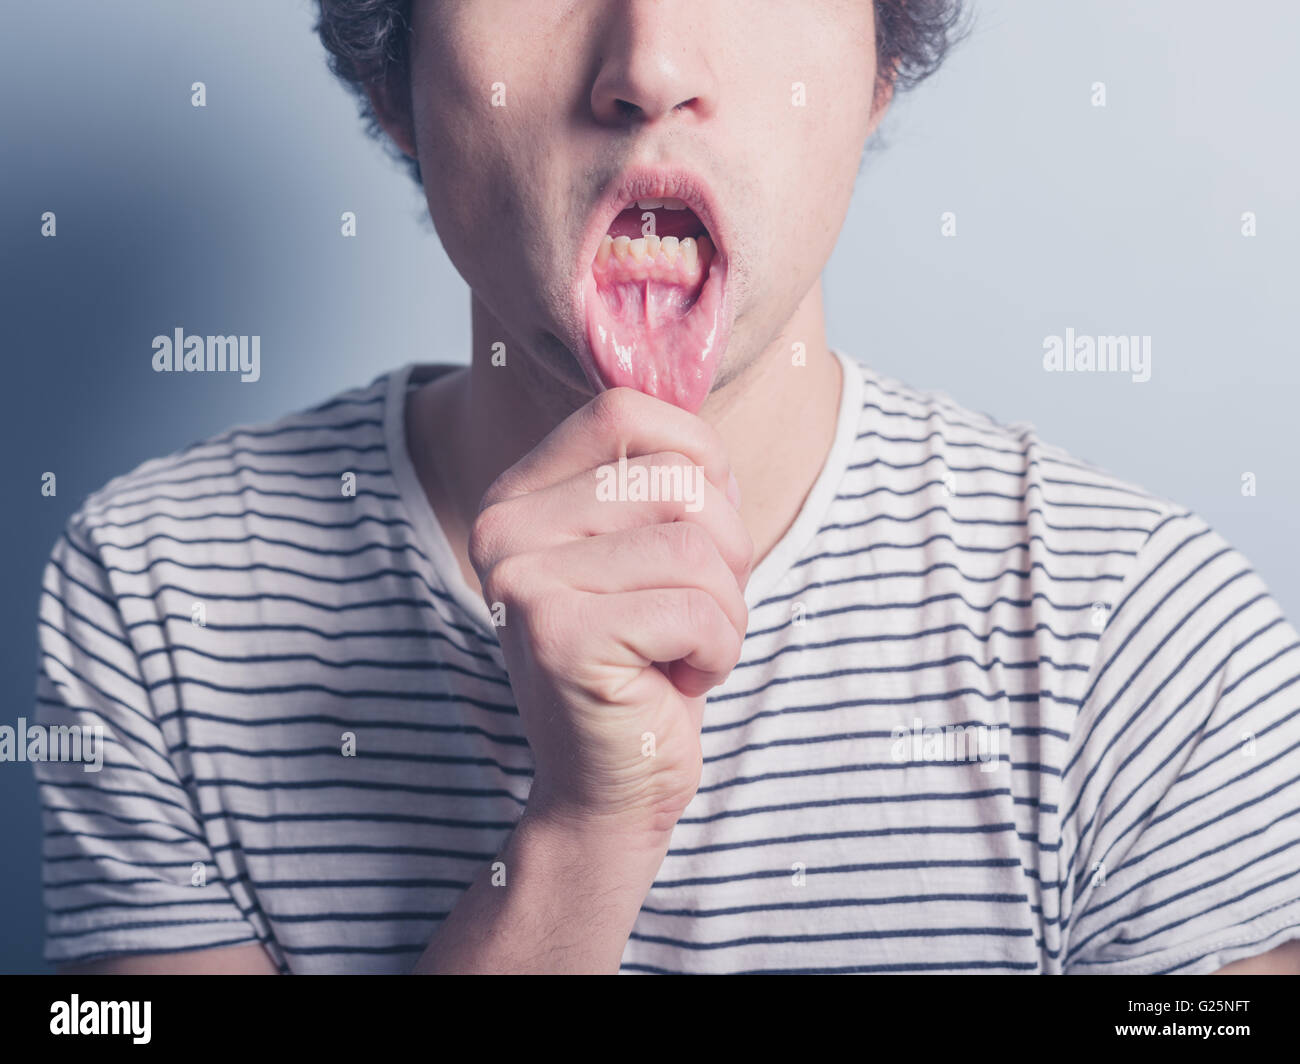 https://c8.alamy.com/comp/G25NFT/a-young-man-is-pulling-his-lower-lip-and-is-acting-silly-G25NFT.jpg